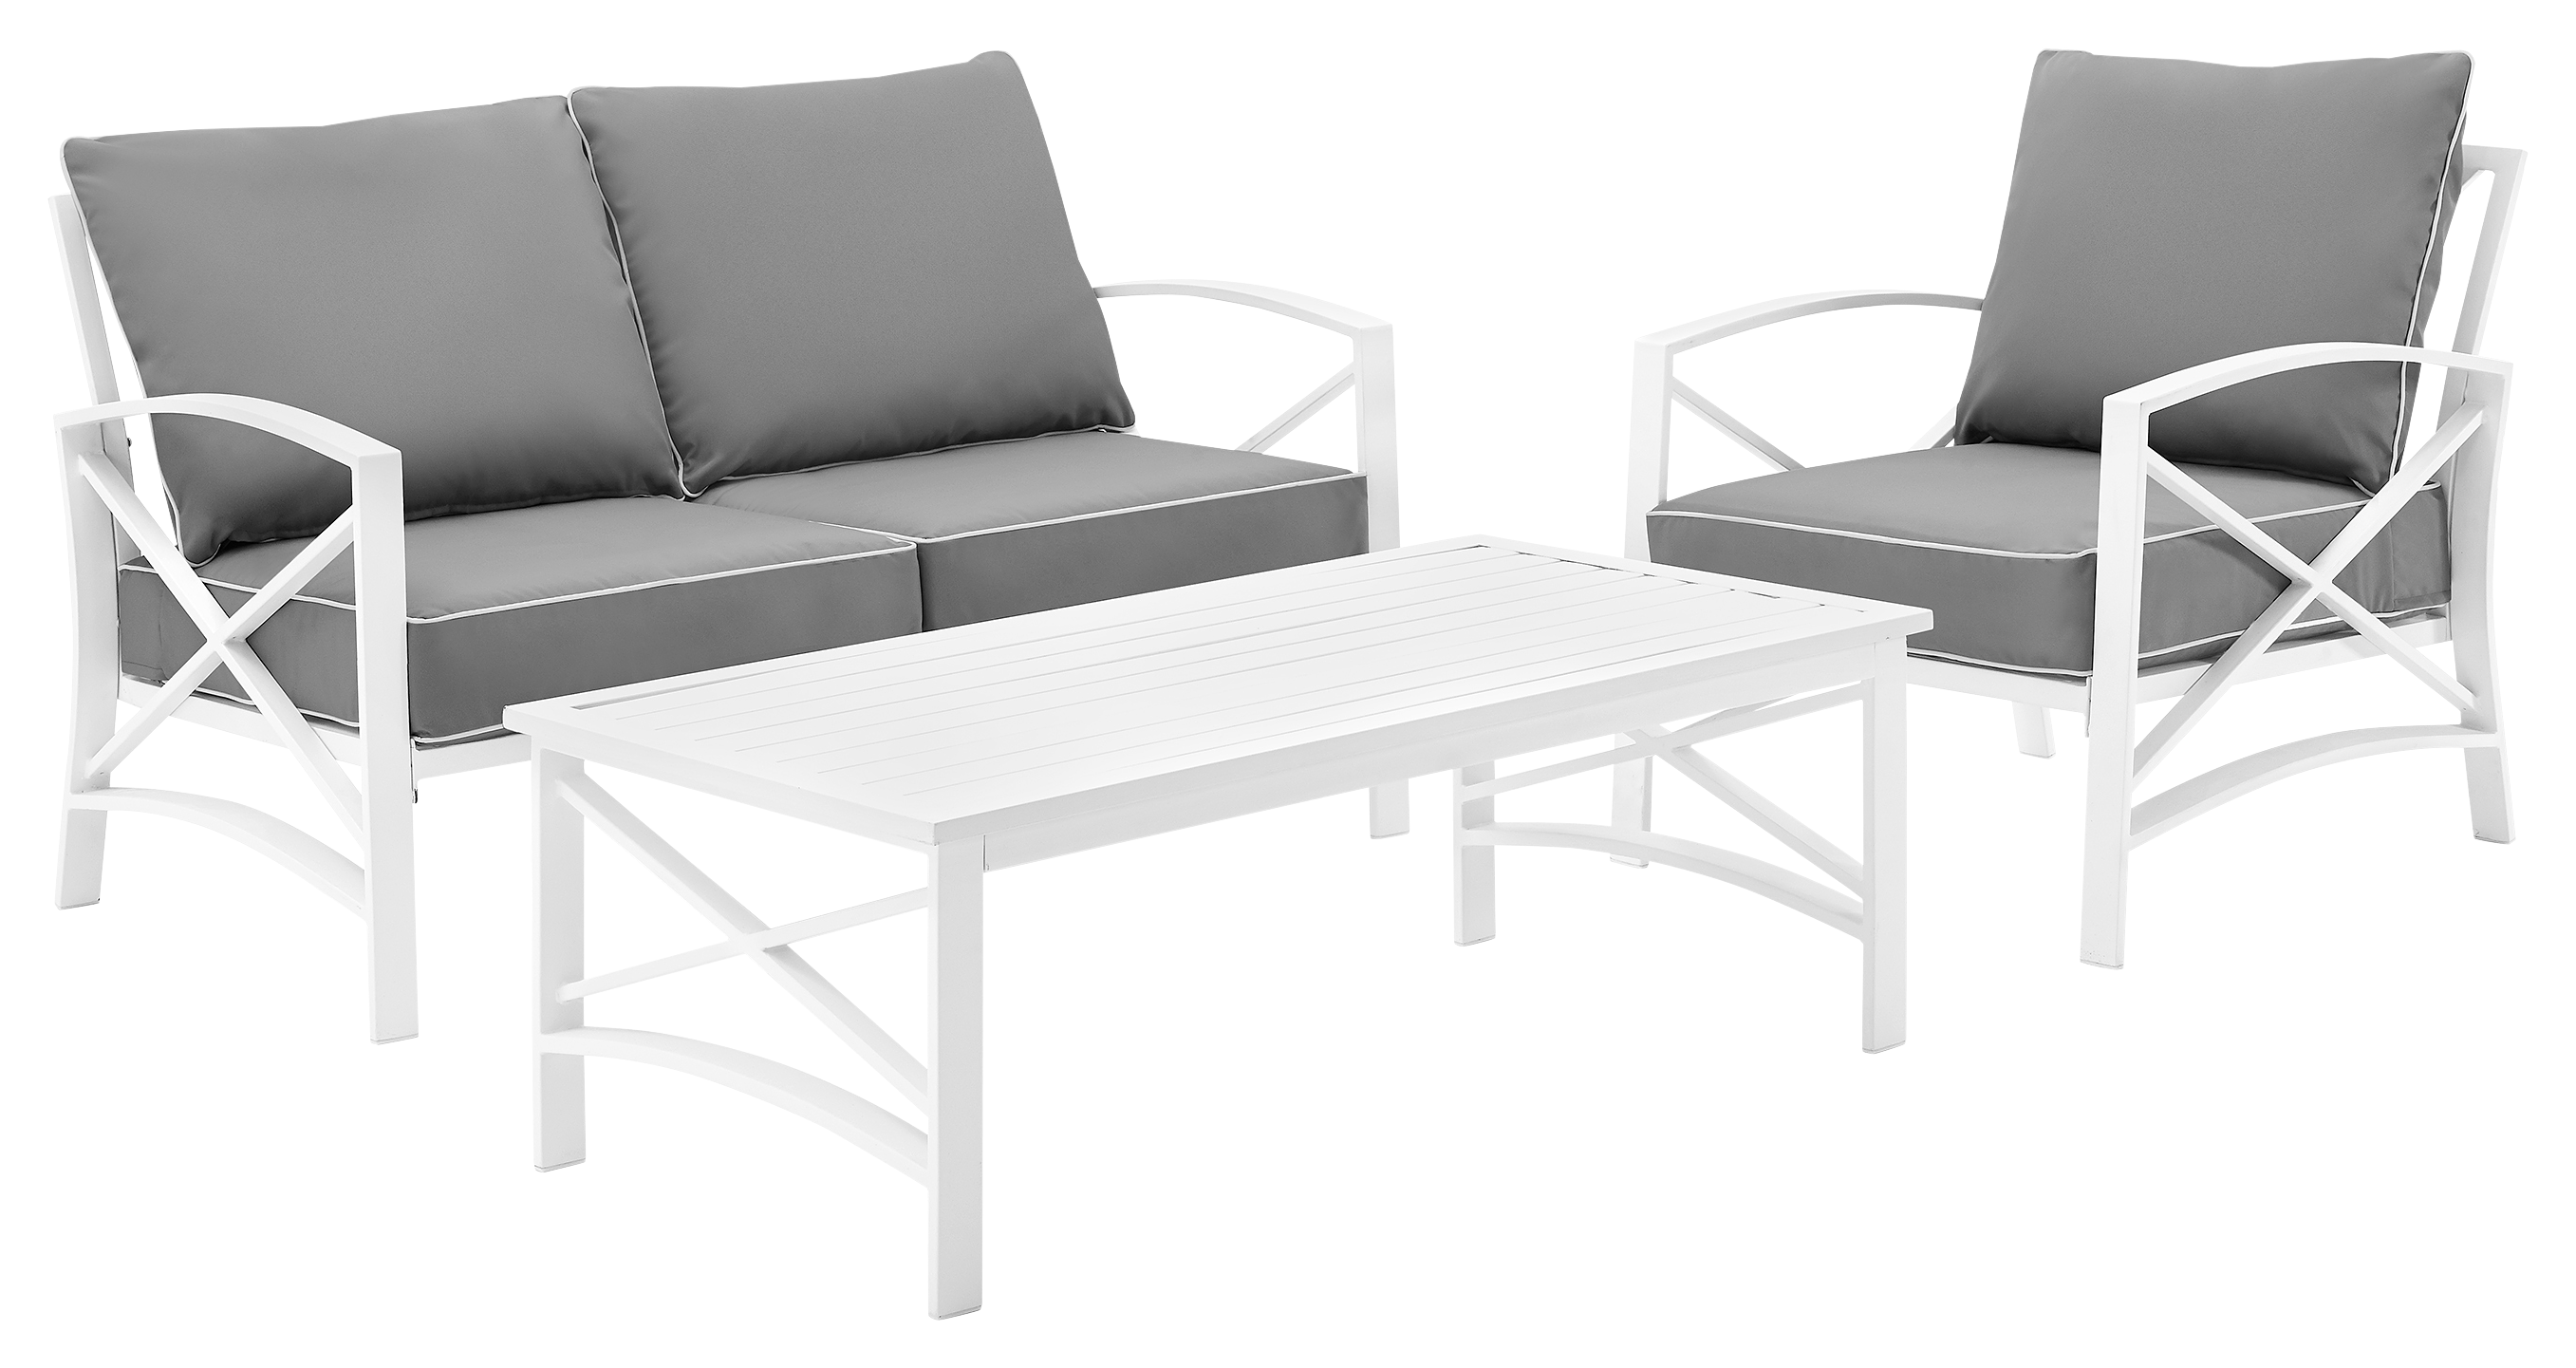 Crosley Kaplan Loveseat, Armchair, And Coffee Table 3 Piece Outdoor Metal Patio Furniture Set Gray/white